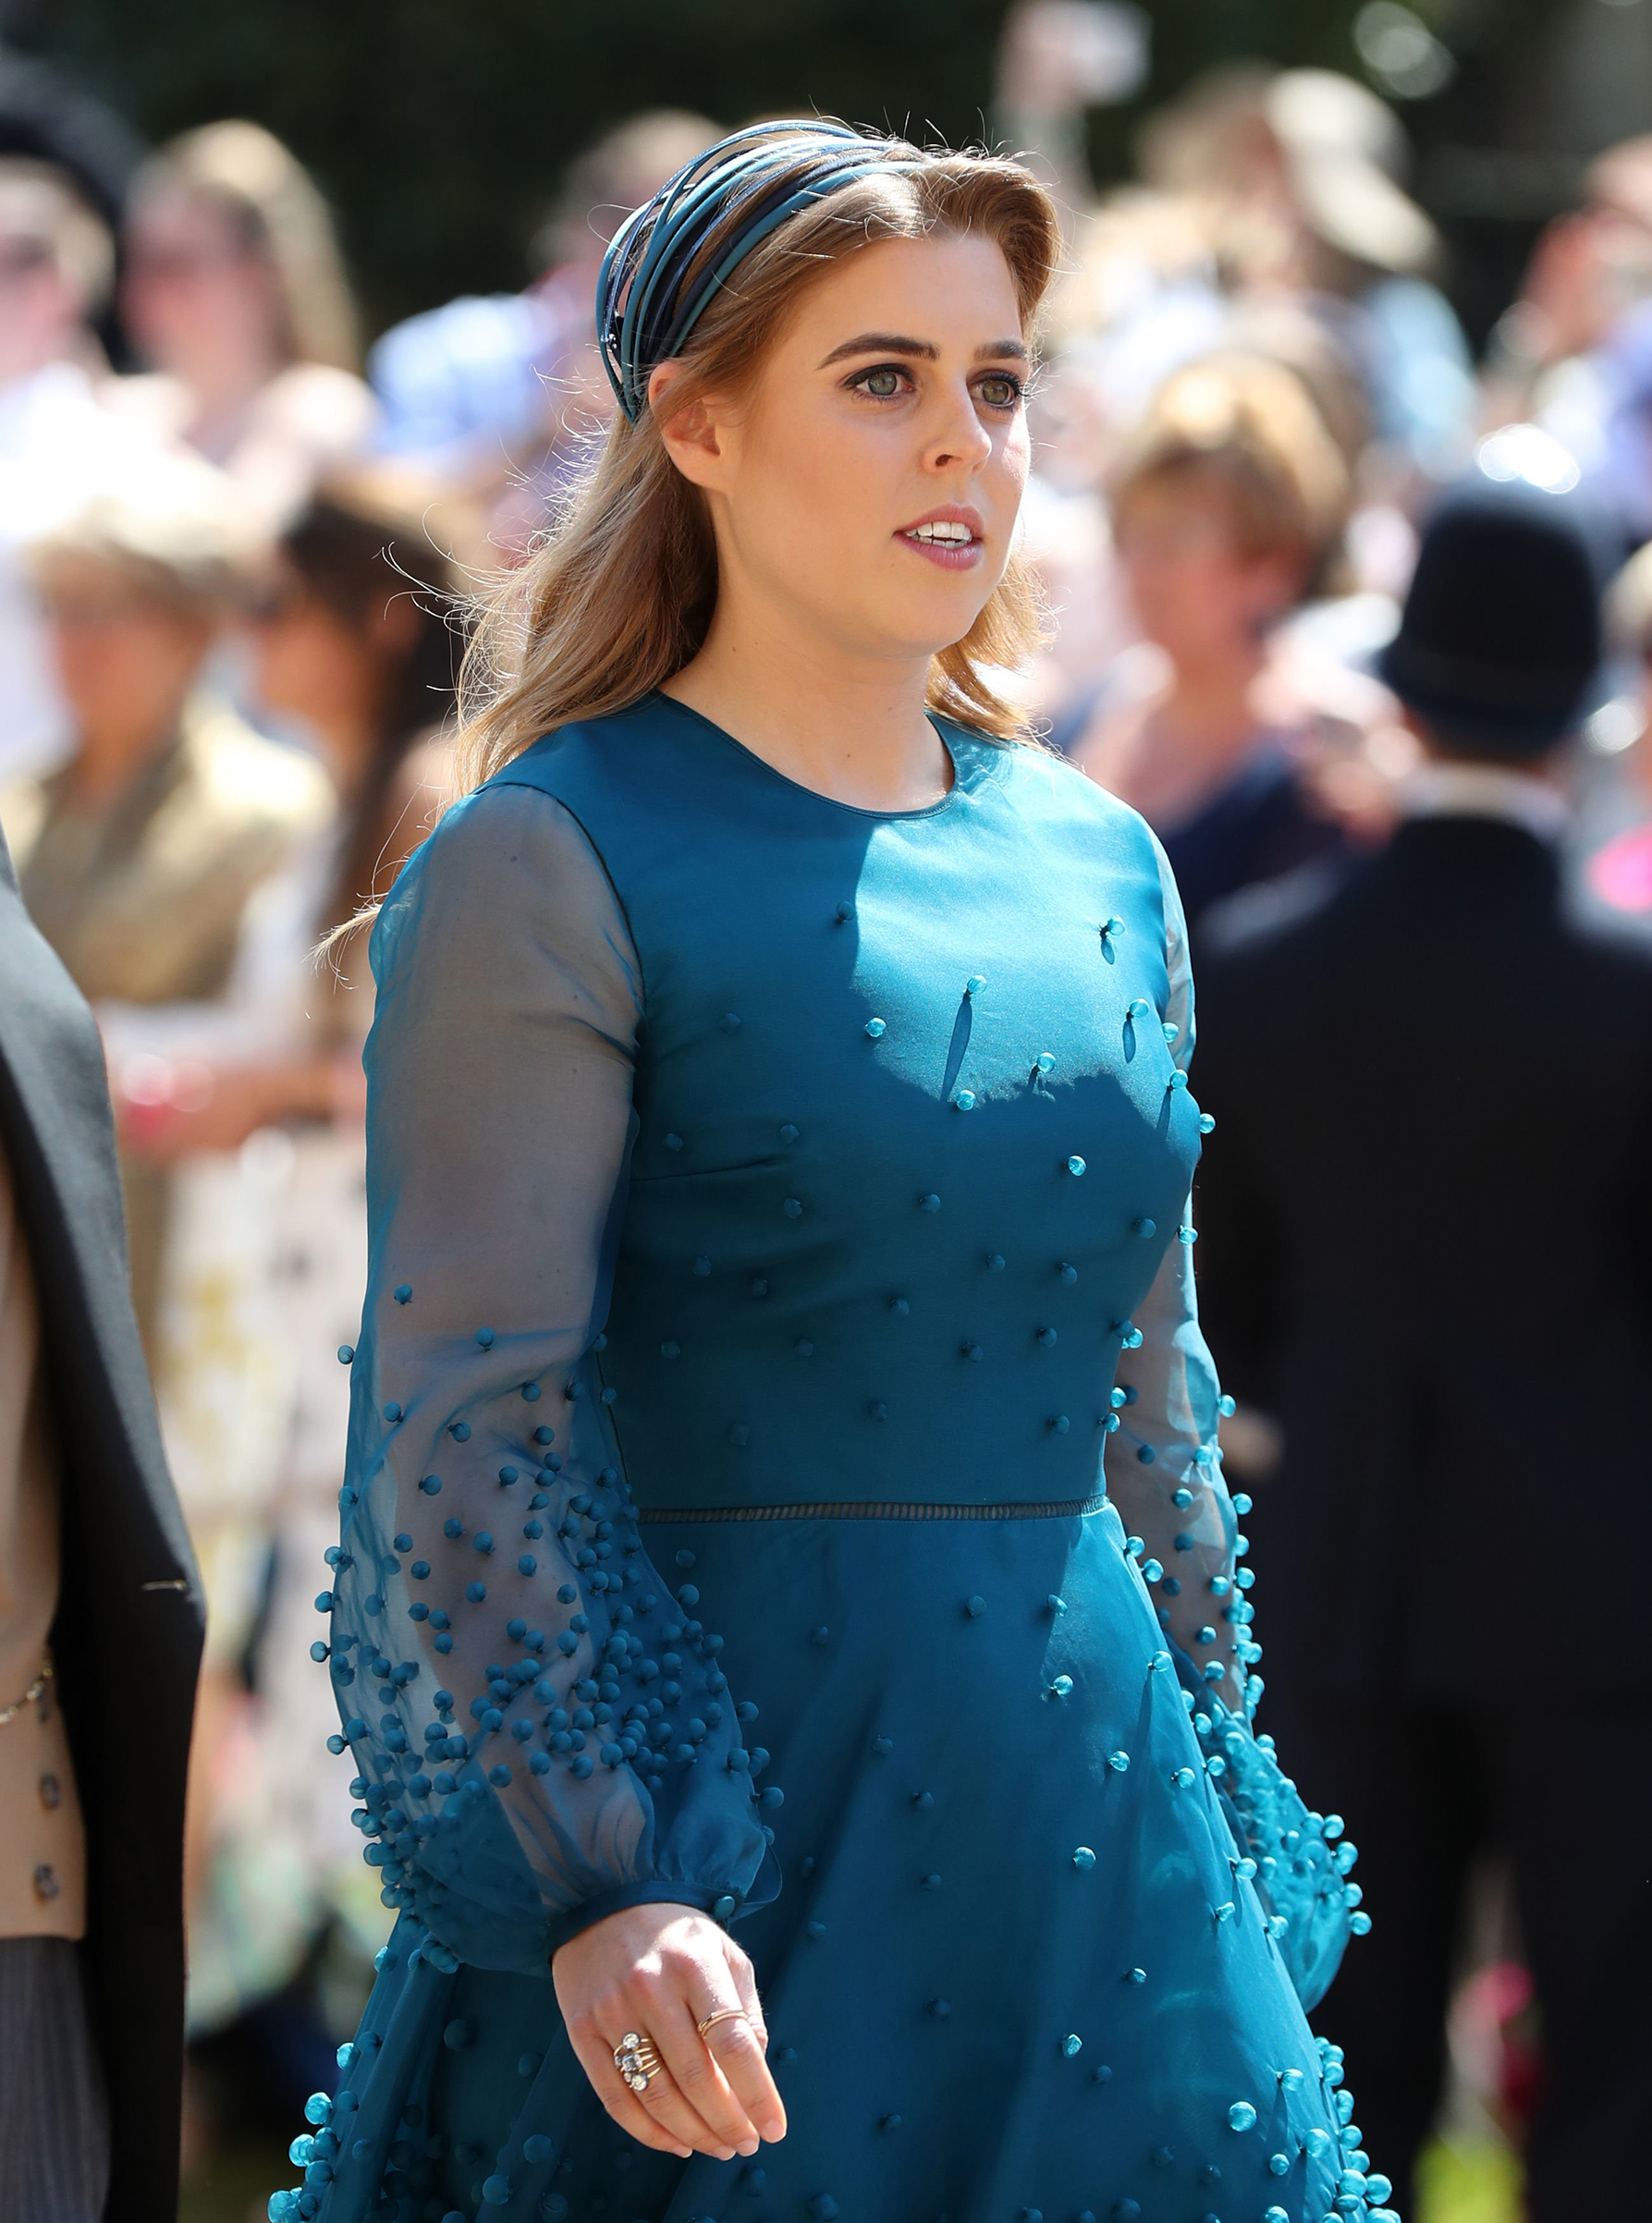 Princess Beatrice arrives at St George's Chapel at Windsor Castle before the wedding of Prince Harry to Meghan Markle on May 19, 2018.